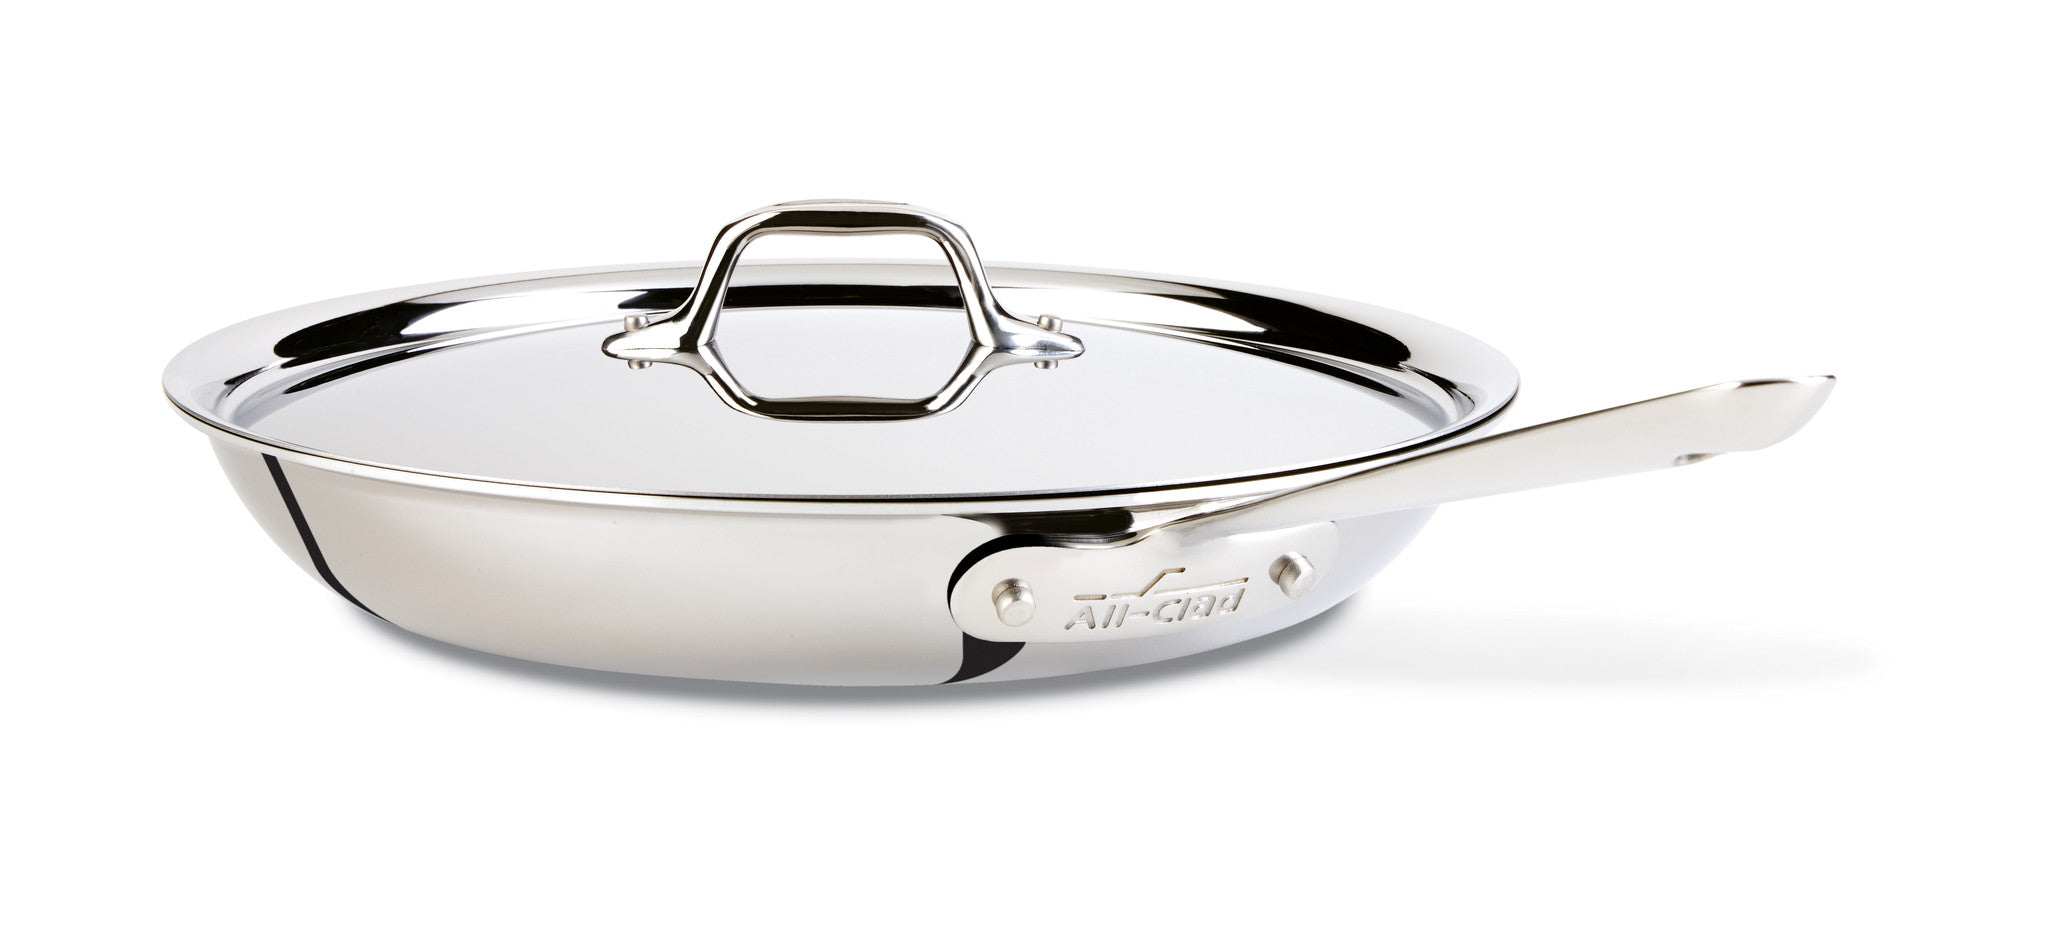 All-Clad Tri-ply/D3 Stainless Steel 1-qt open sauce pan